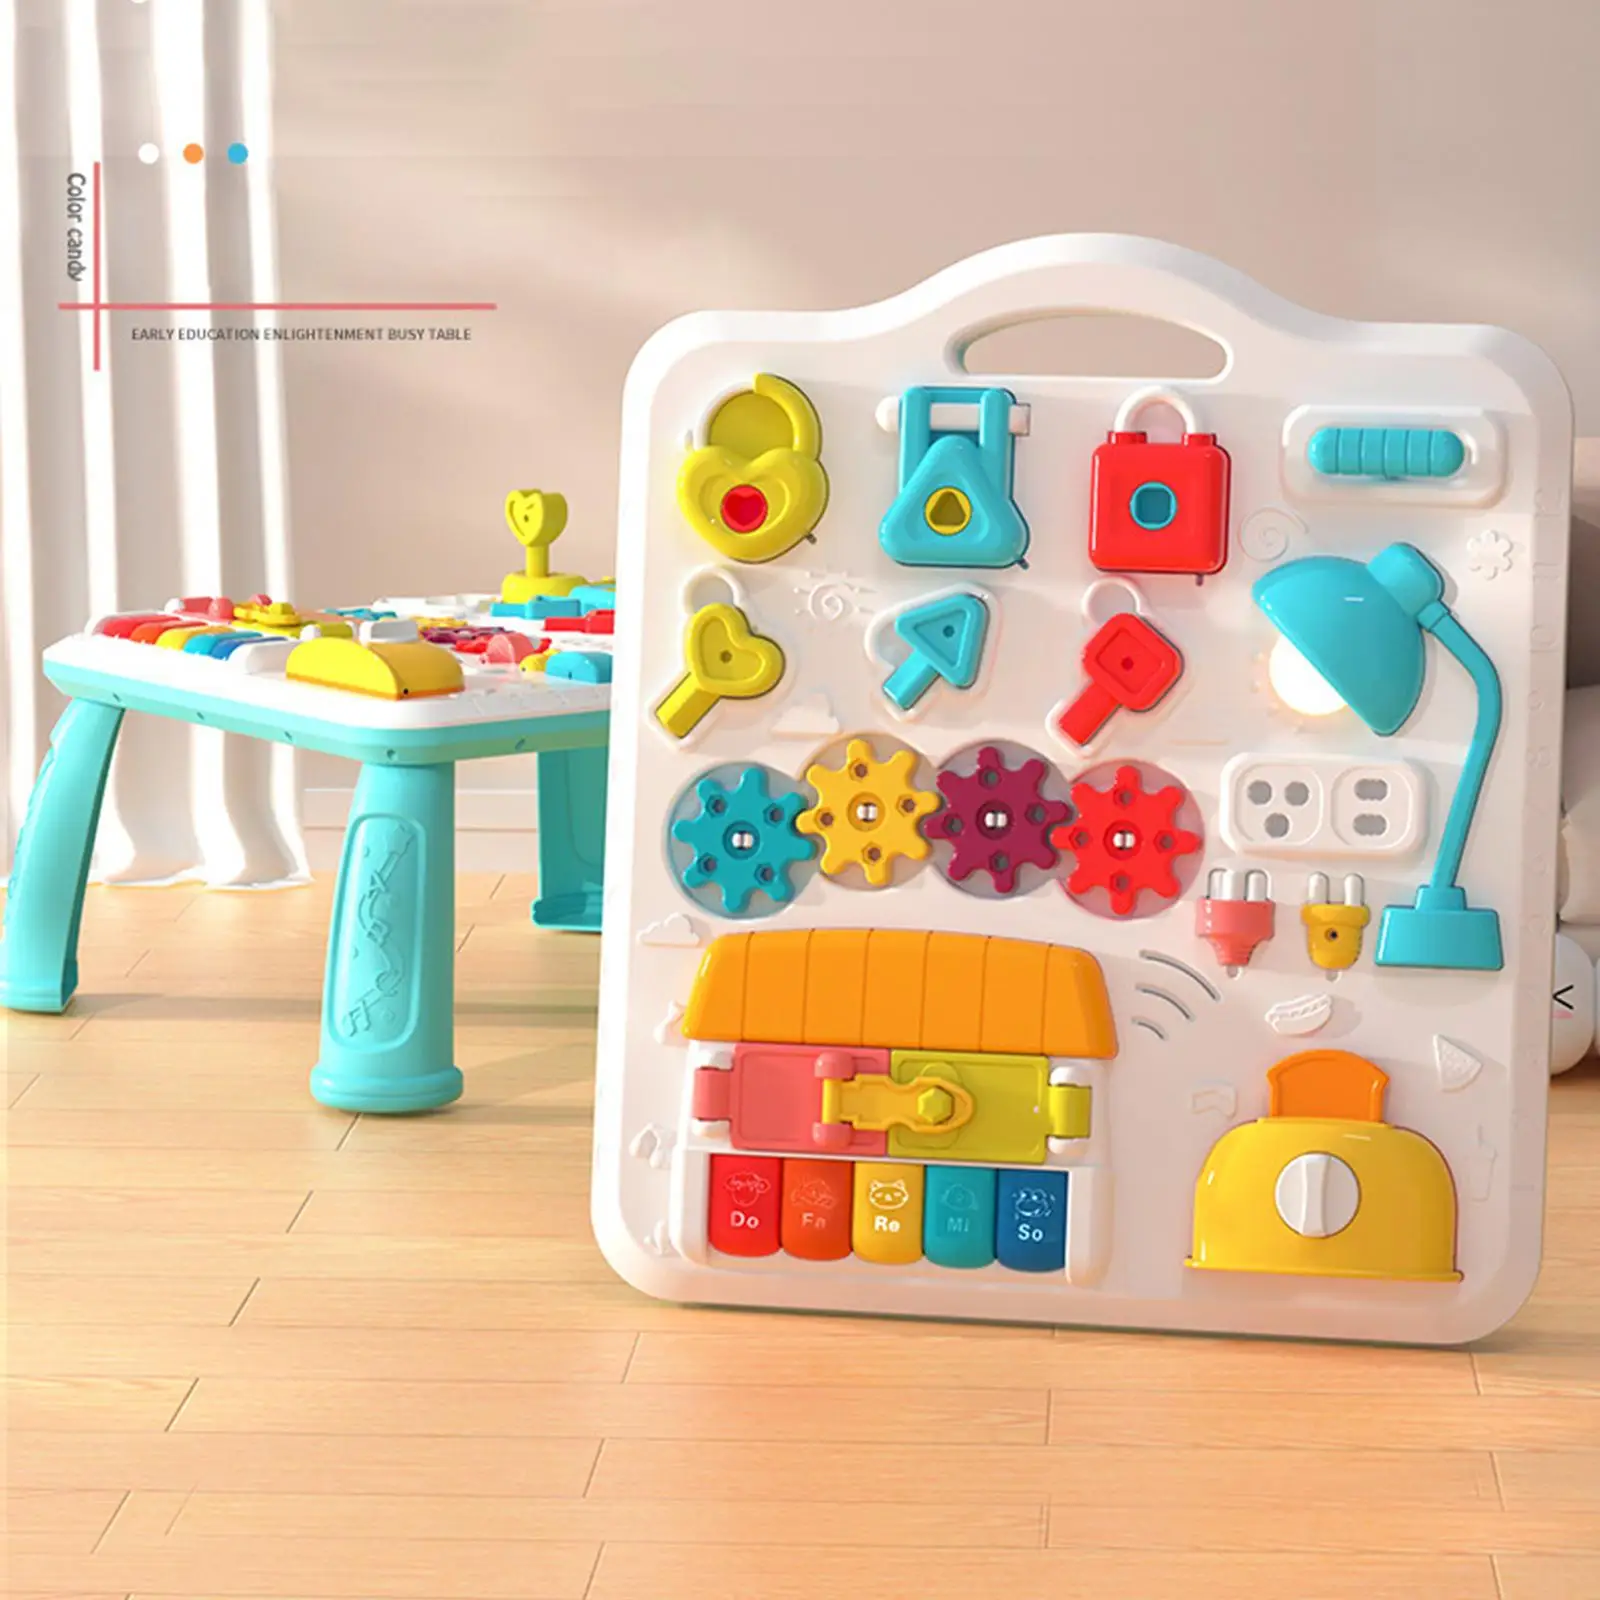 Multifunctional Learning Table Educational Play Toys with Leg Support Colorful Detachable Busy Table for Gift Girls Child Boys